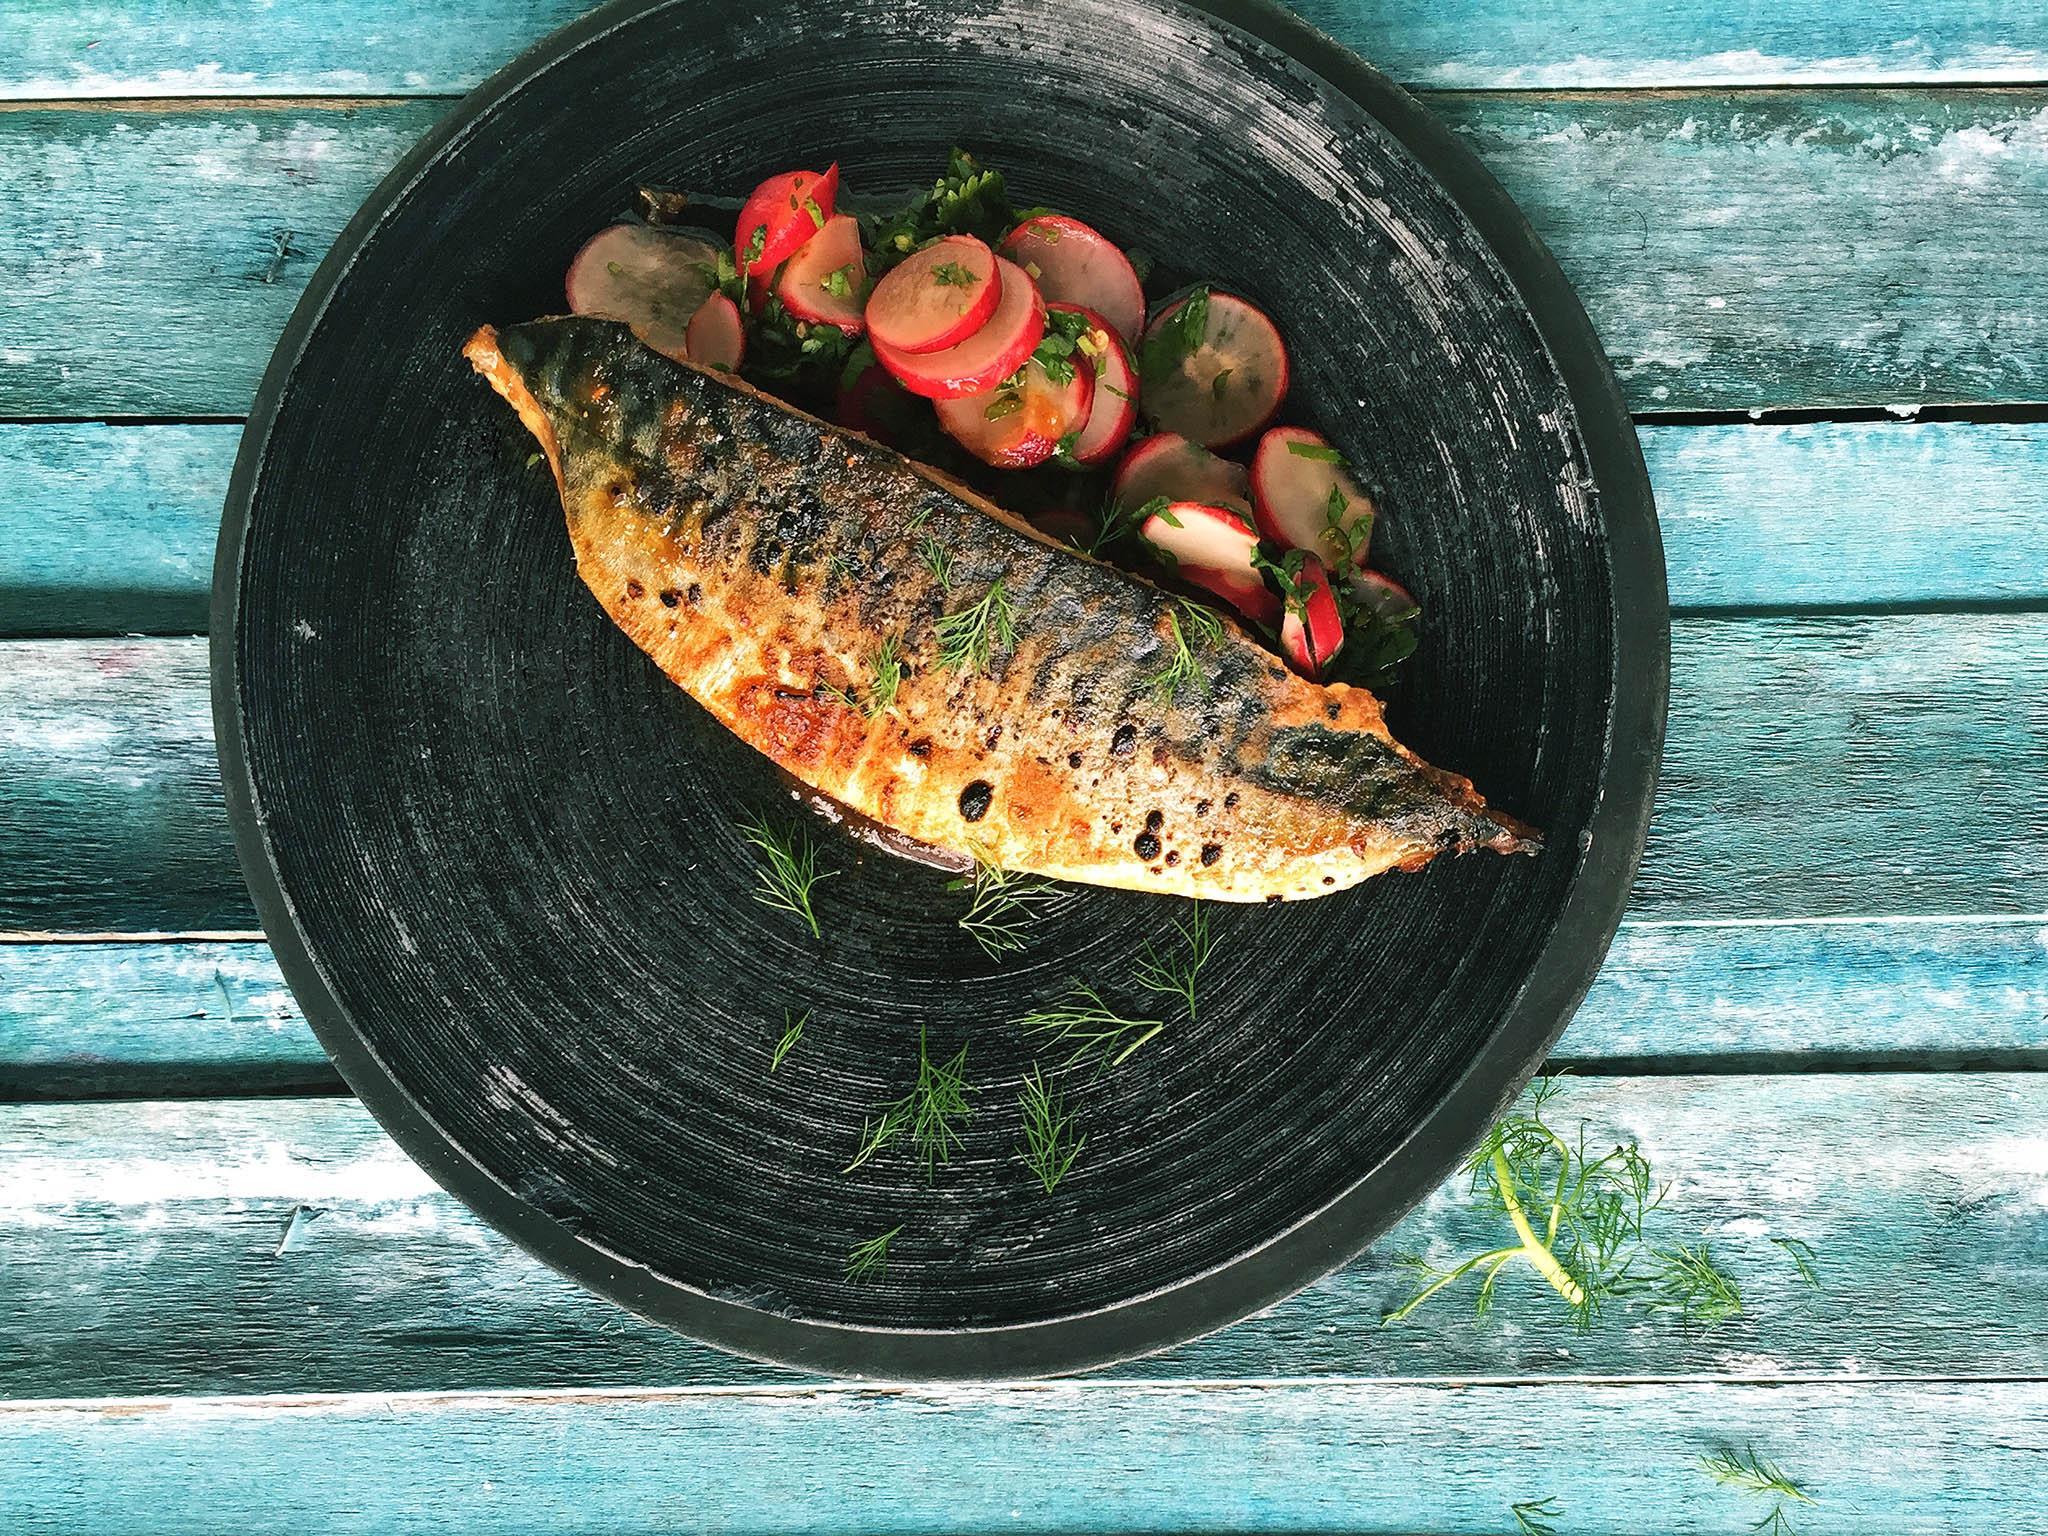 Using the best of seasonal fish that's been marinated in a warming spice blend, these fillets are best served grilled